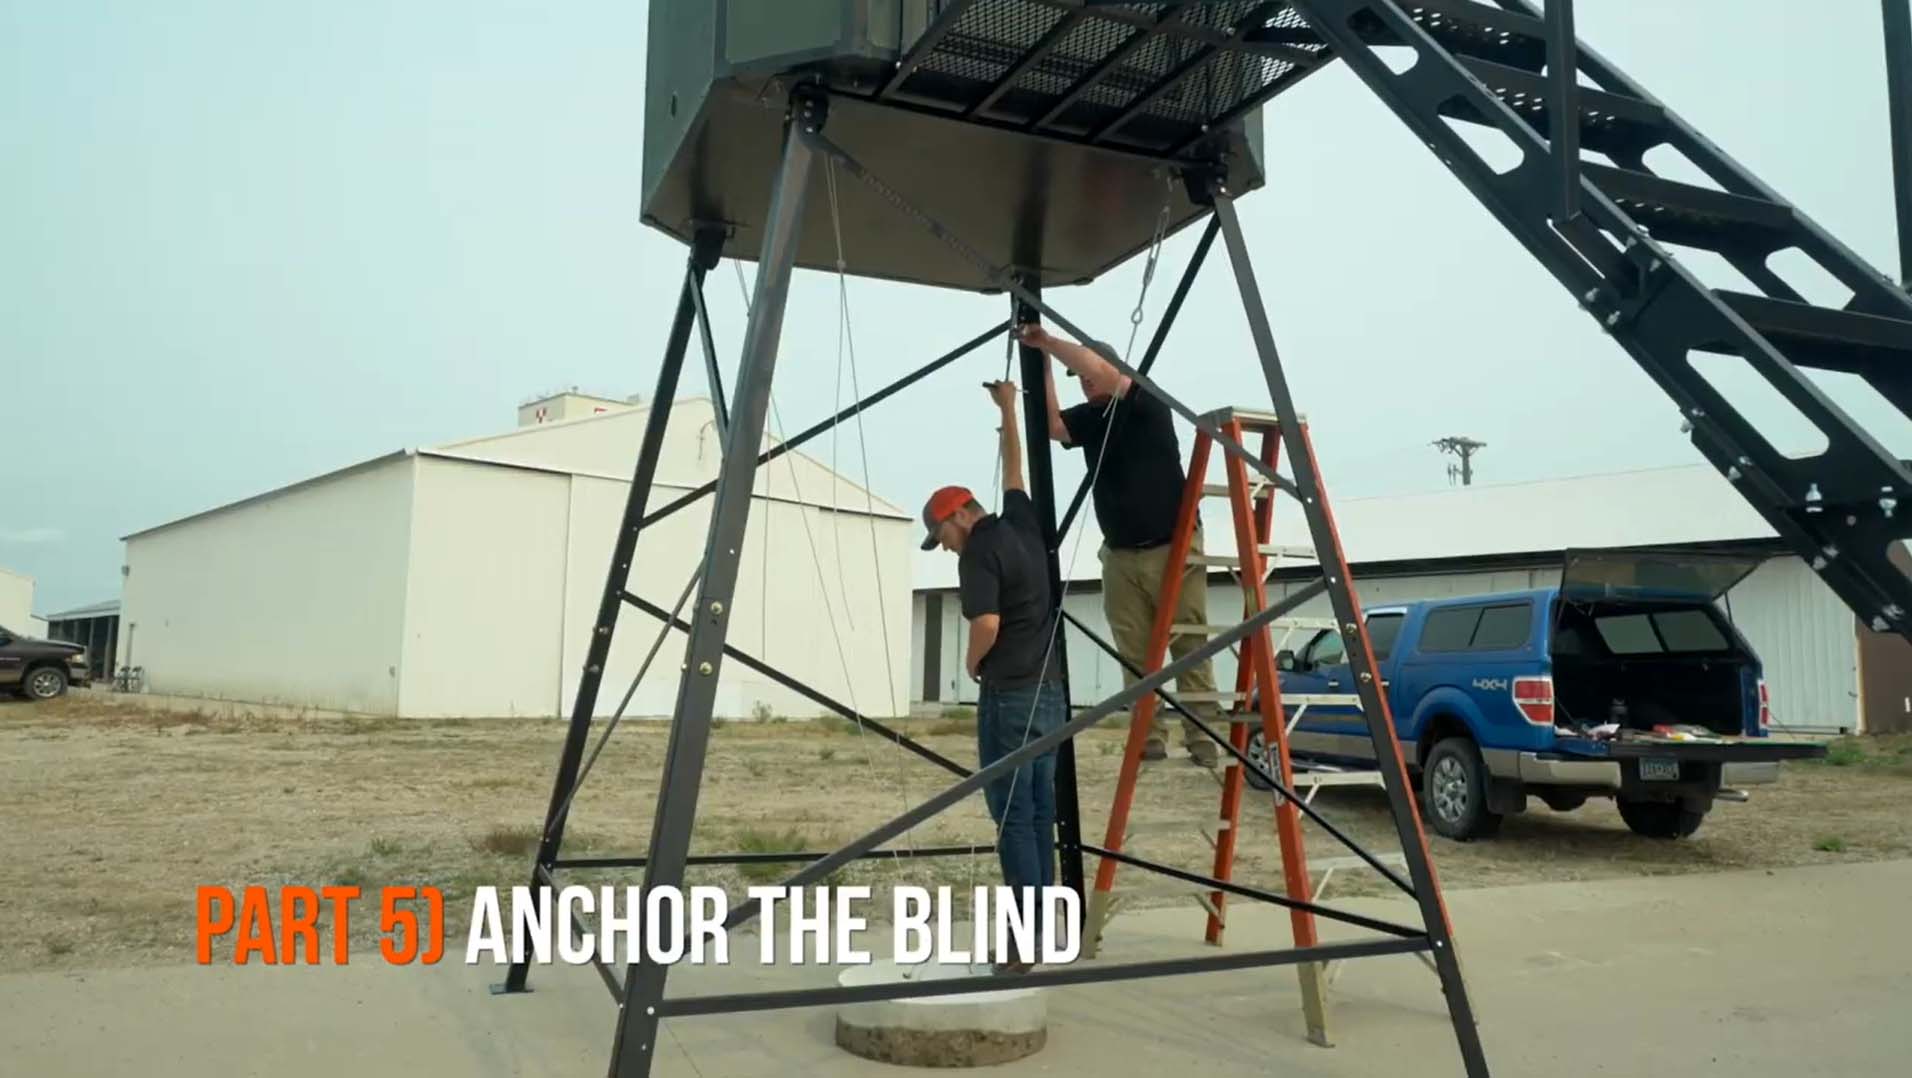 Anchoring the blind on the stand